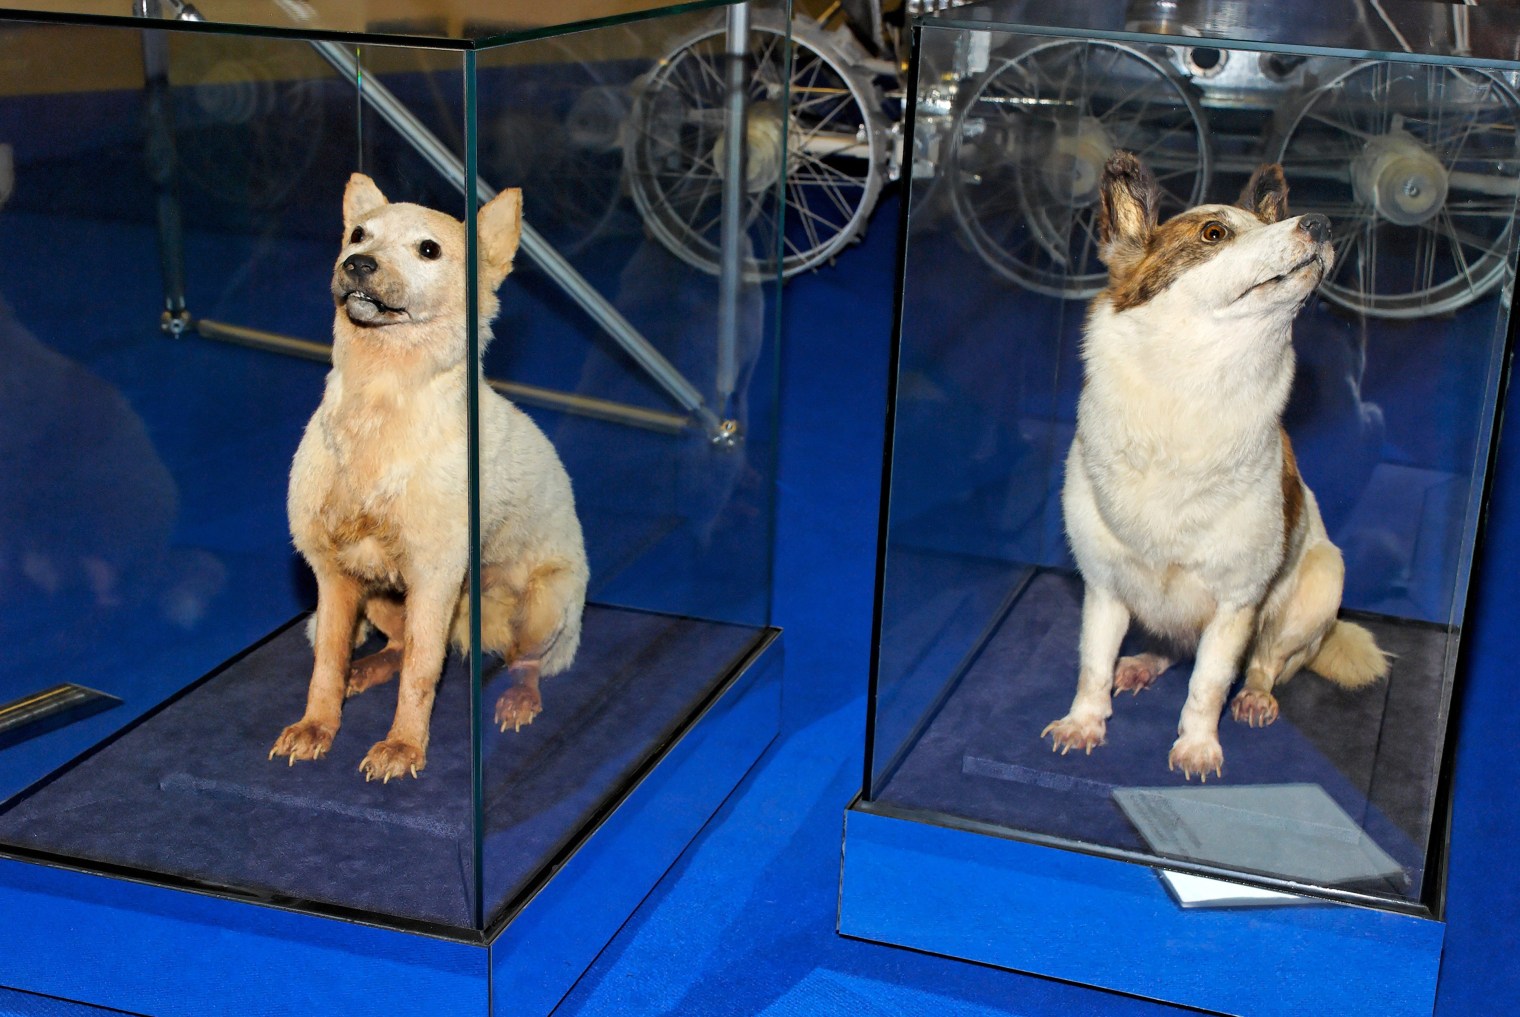 Meet the Heroic Animals That Went Into Space Before Humans